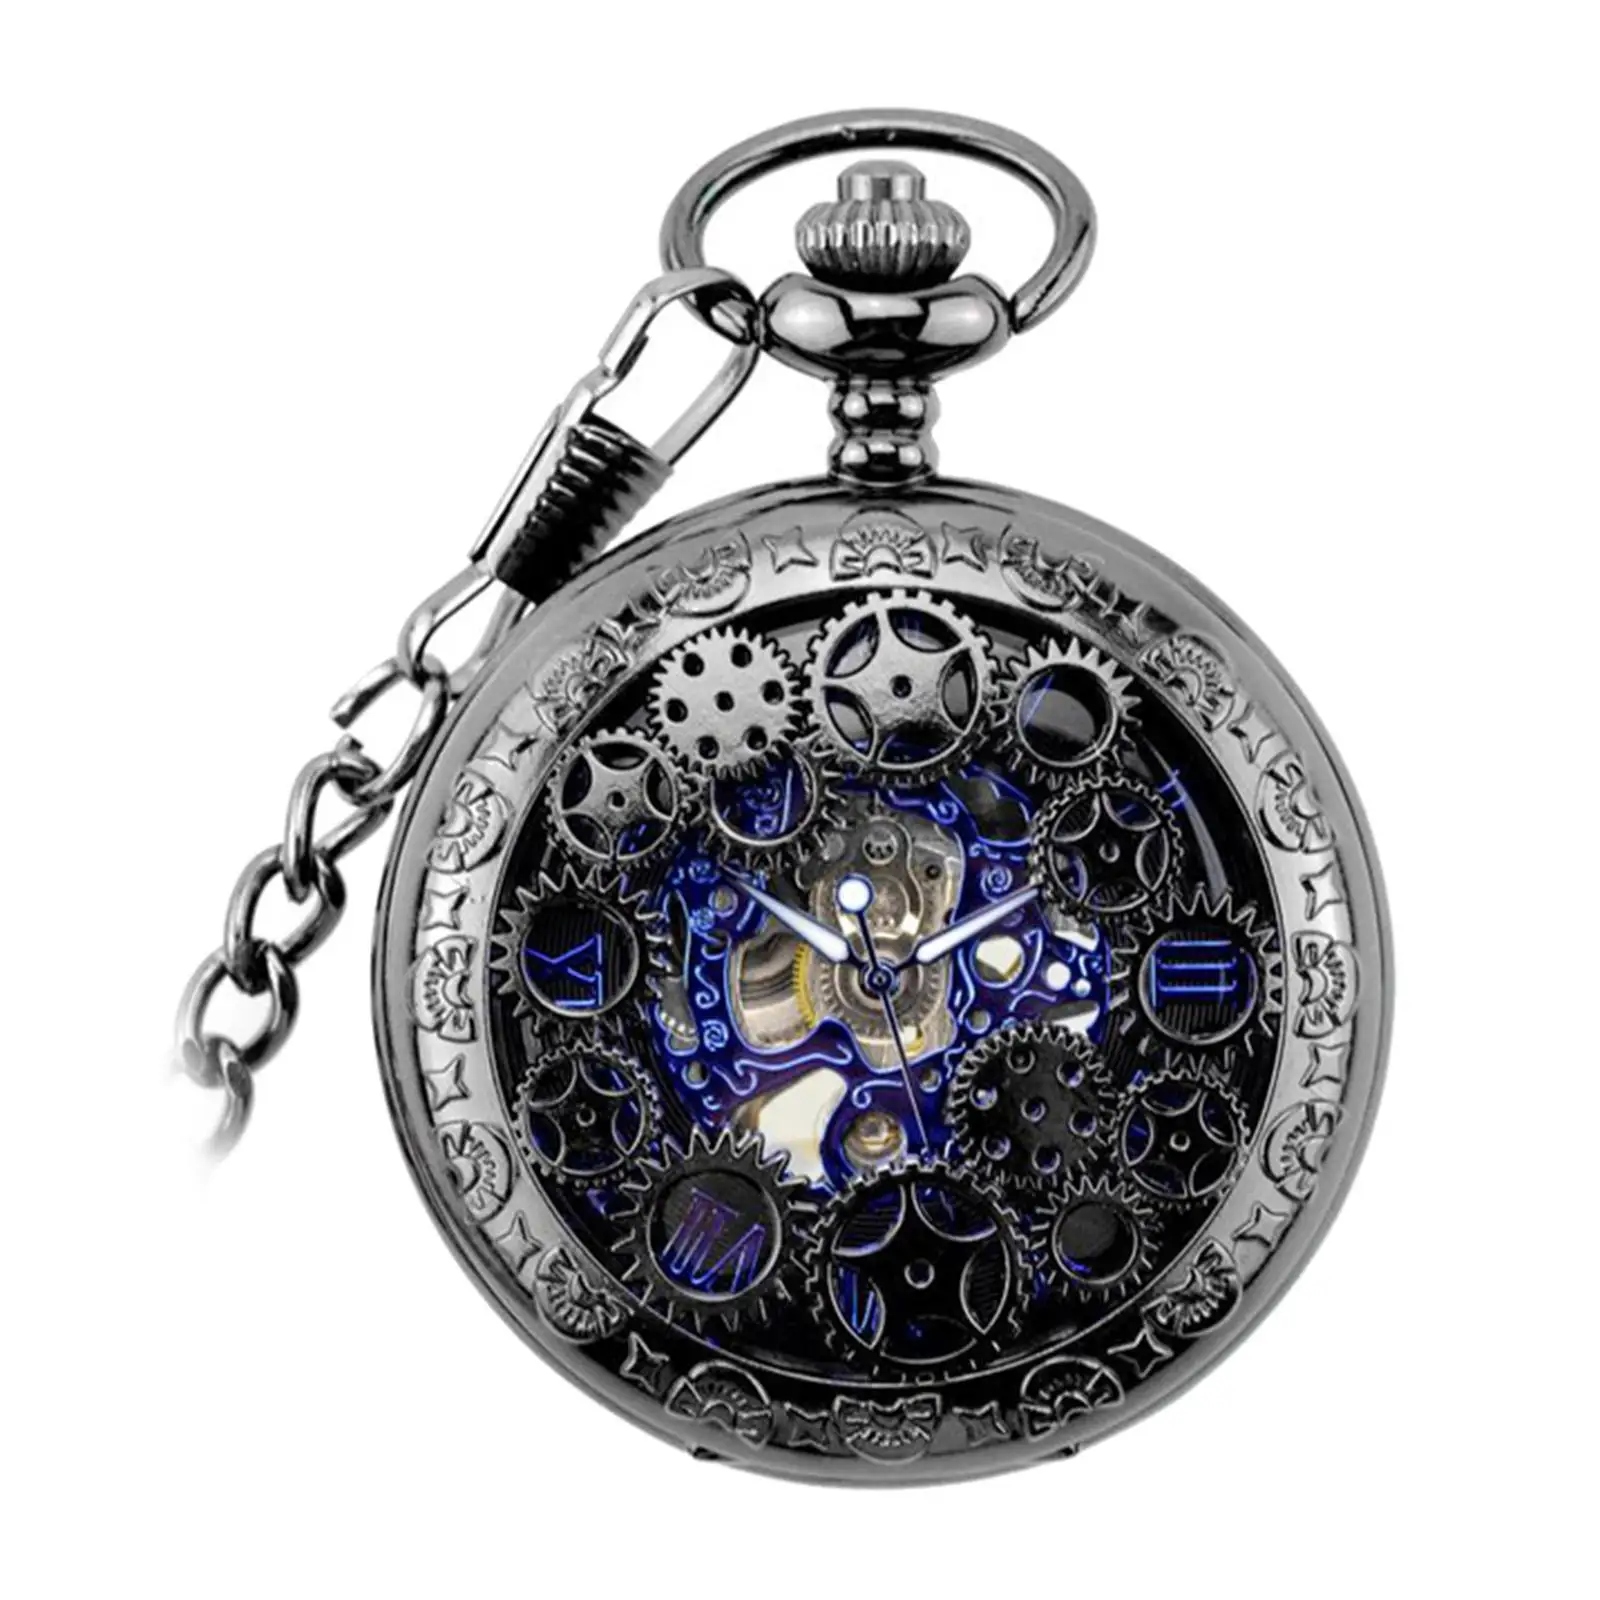 Classic Skeleton Roman Design Metal Mechanical Hand Winding Pocket Watch with Chain